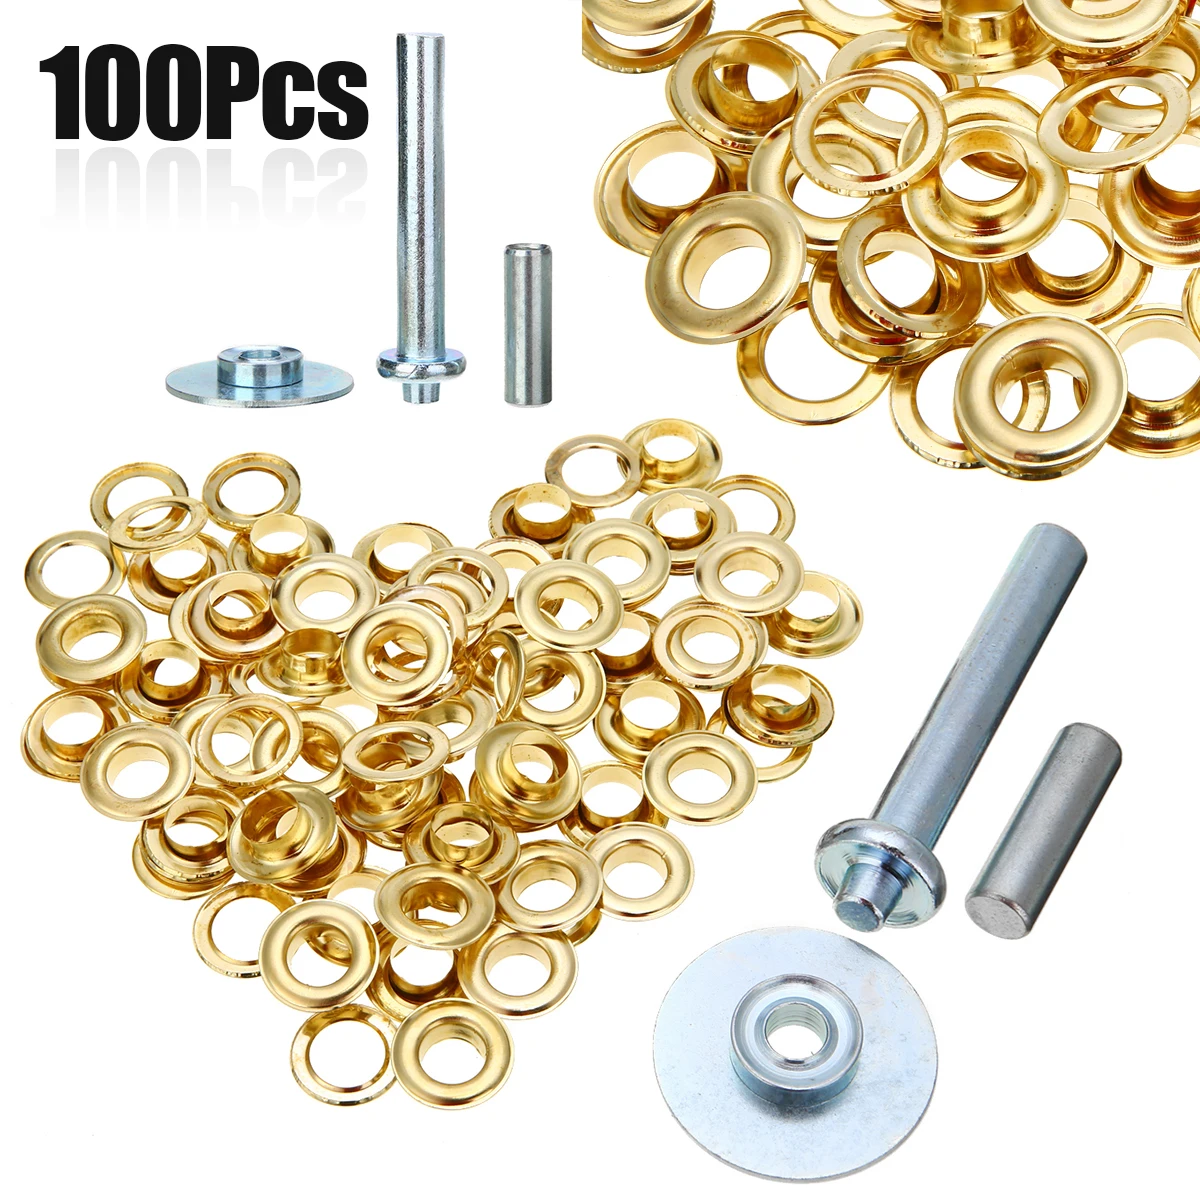 

100pcs Washer Grommets with Steel Eyelet Hole Punch Grommet Punch Stand Repair Kit